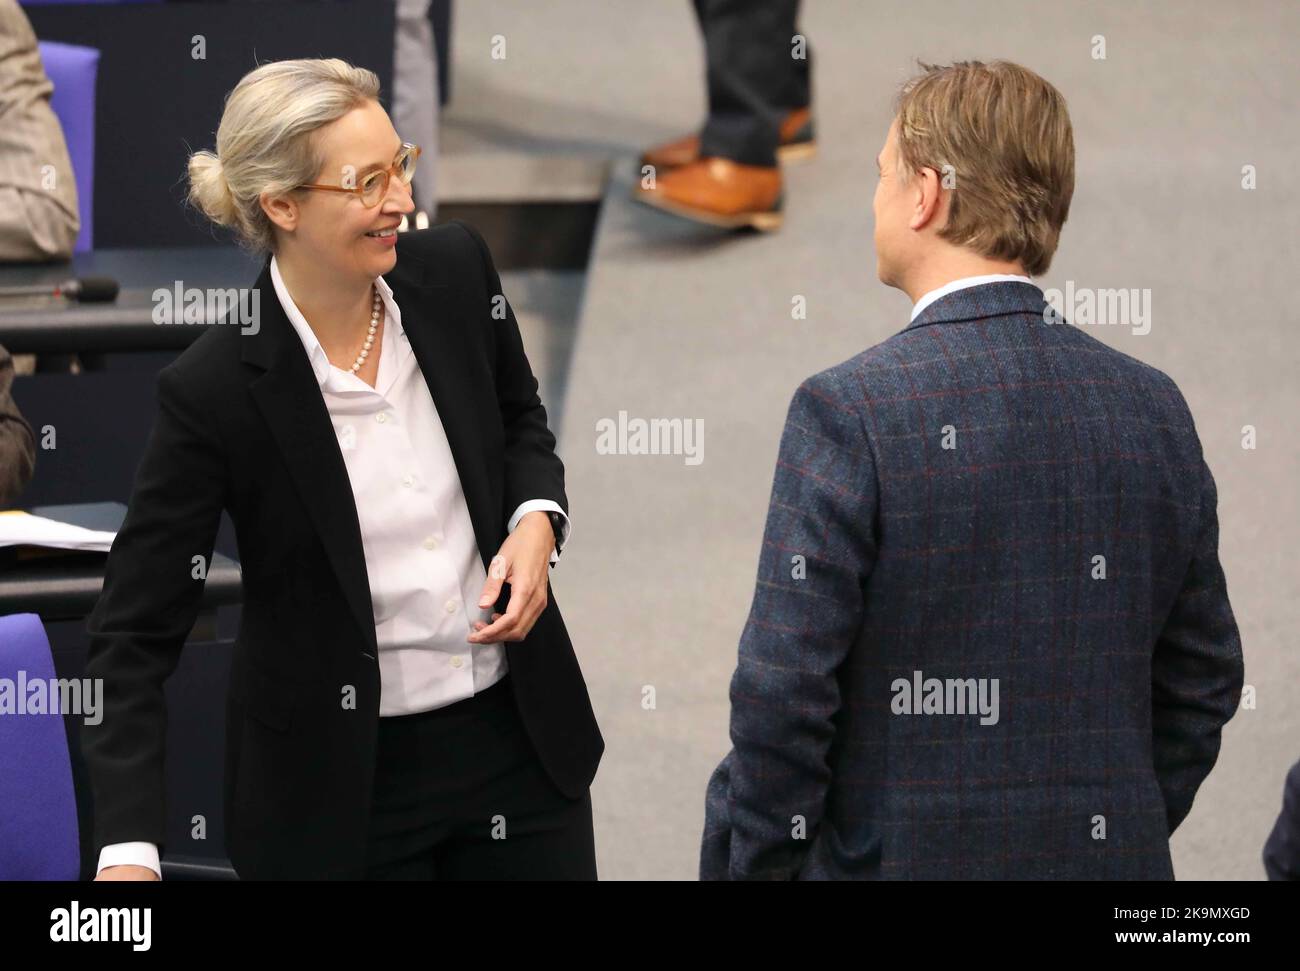 Berlin, Germany, October 20, 2022. Dr. Alice Weidel, Chairwoman of the AfD parliamentary group, in conversation with Dr. Bernd Baumann. Stock Photo